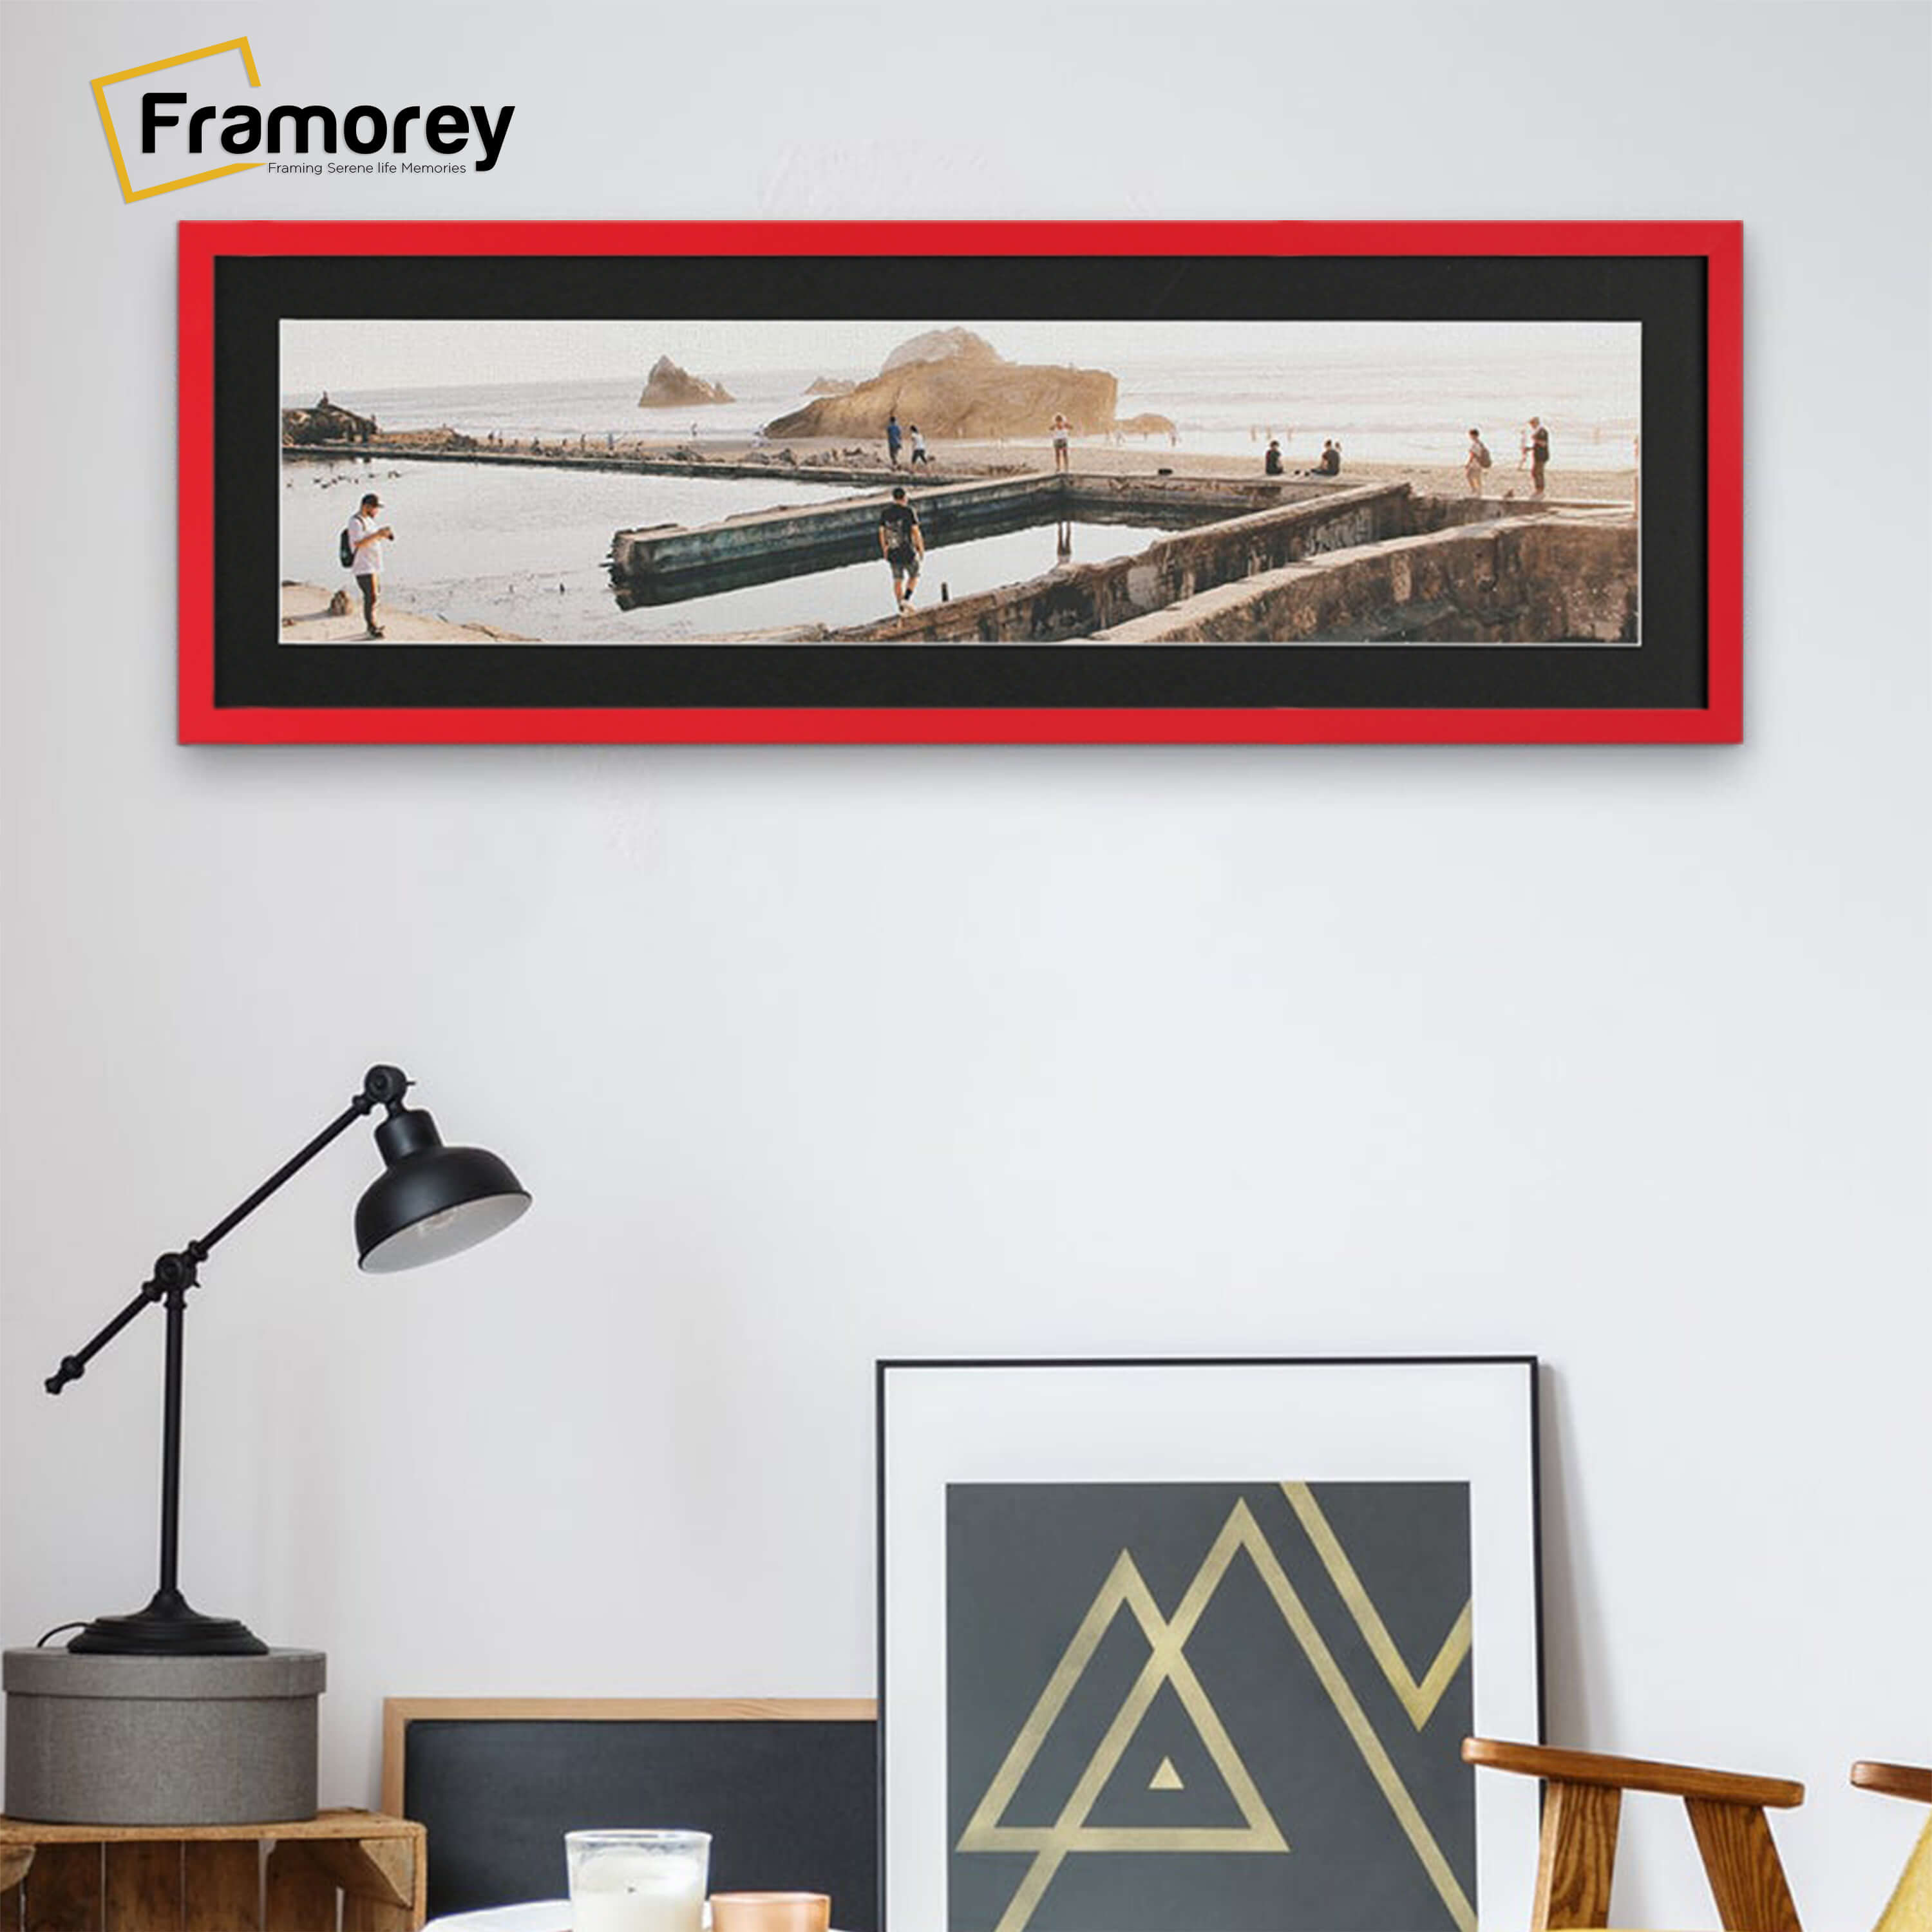 Thin Matt Panoramic Red Picture Frames With Black Mount